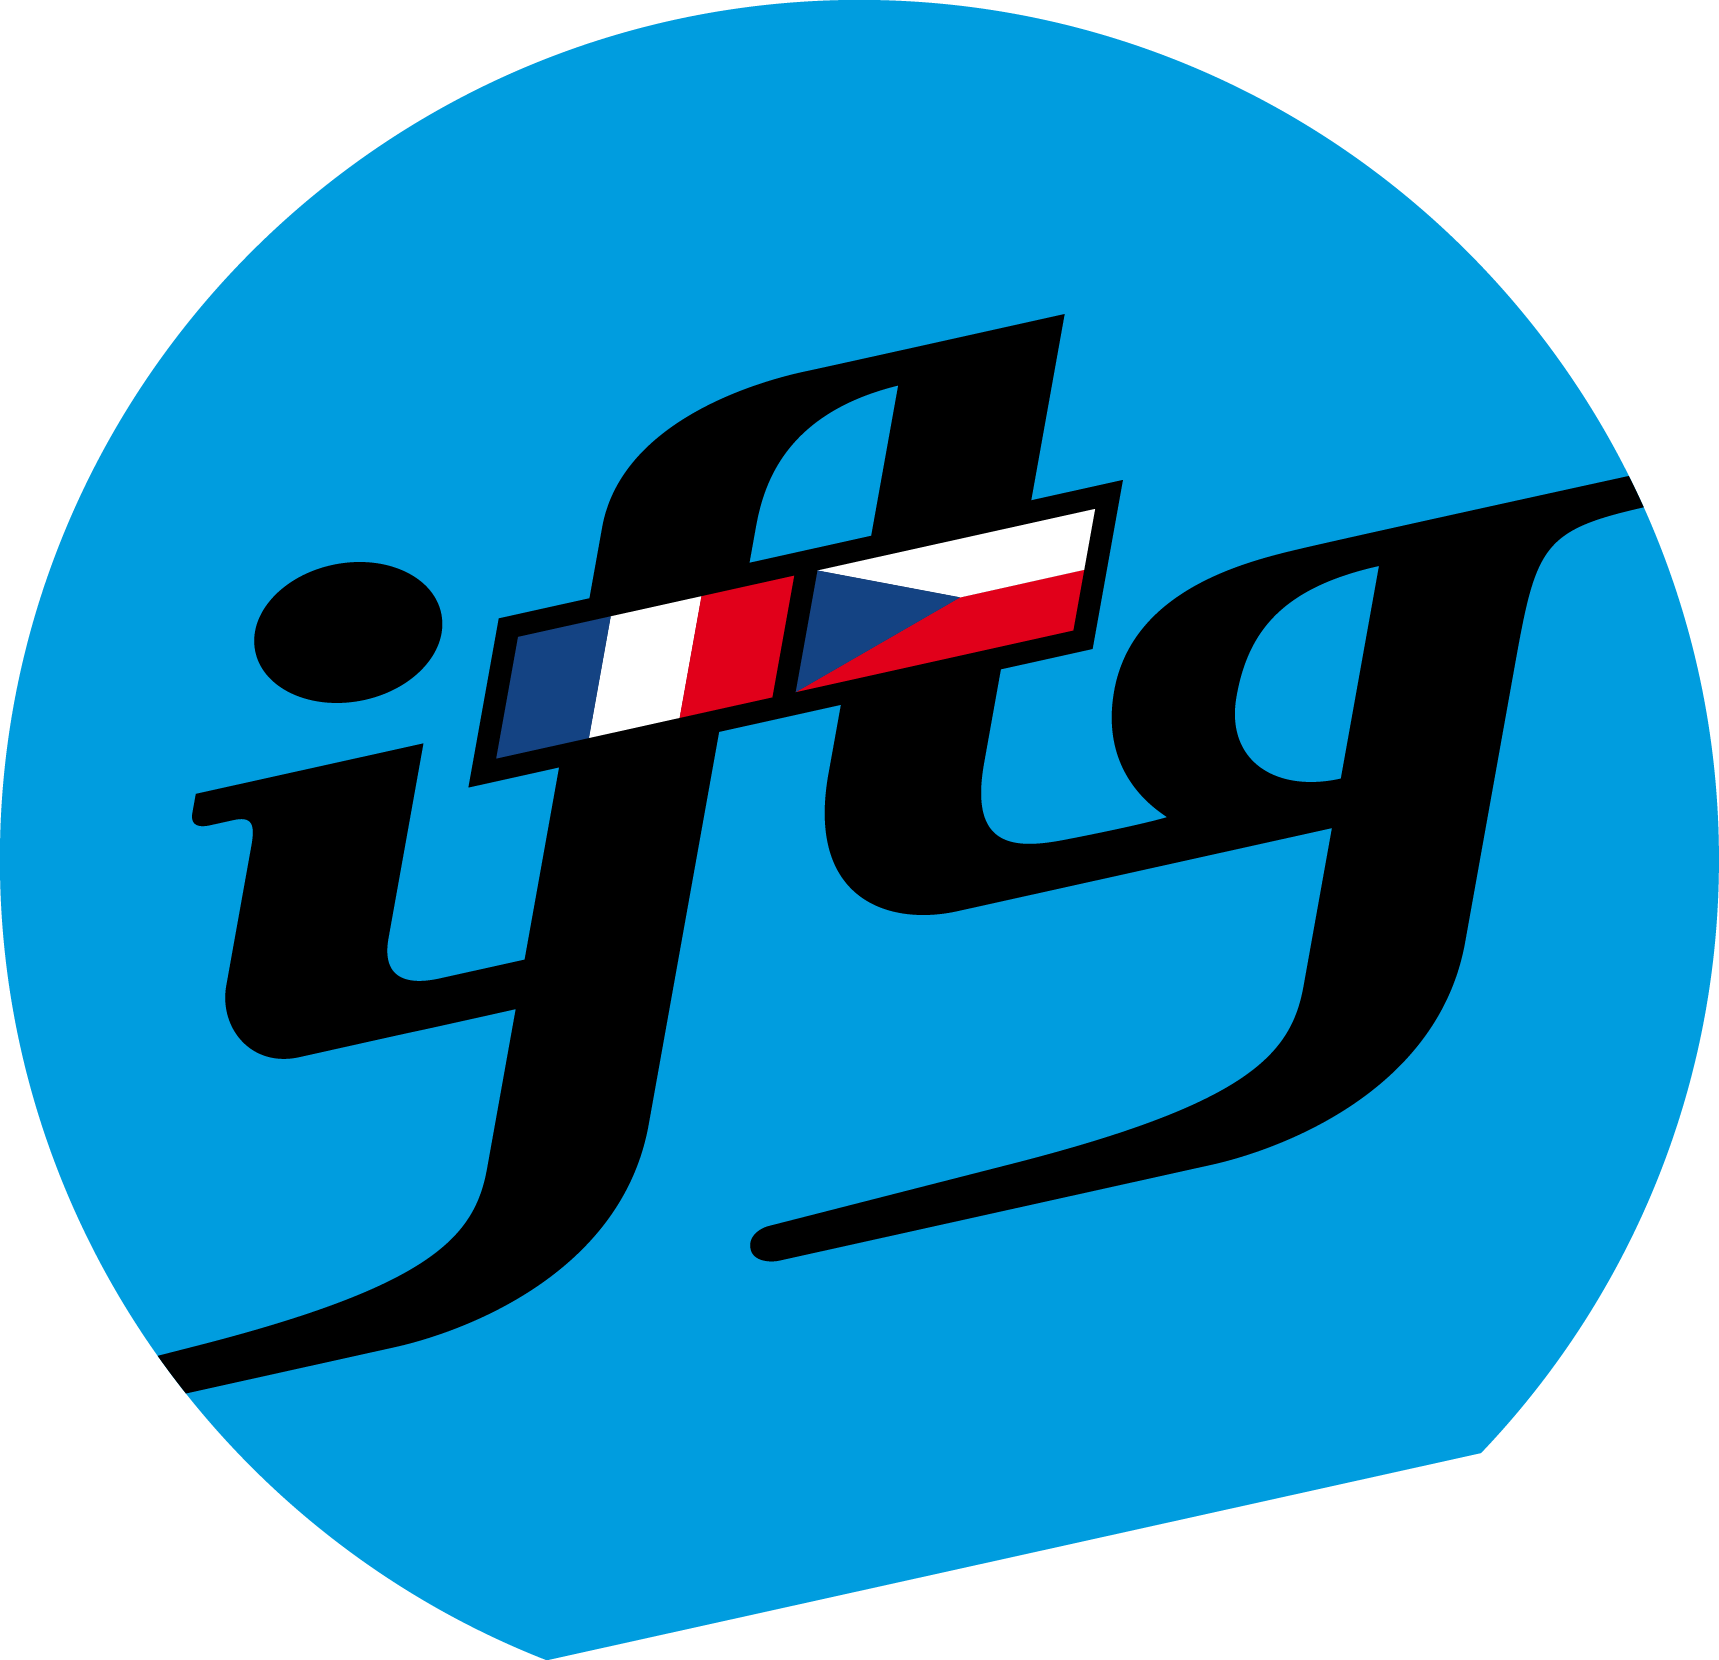 IFTG